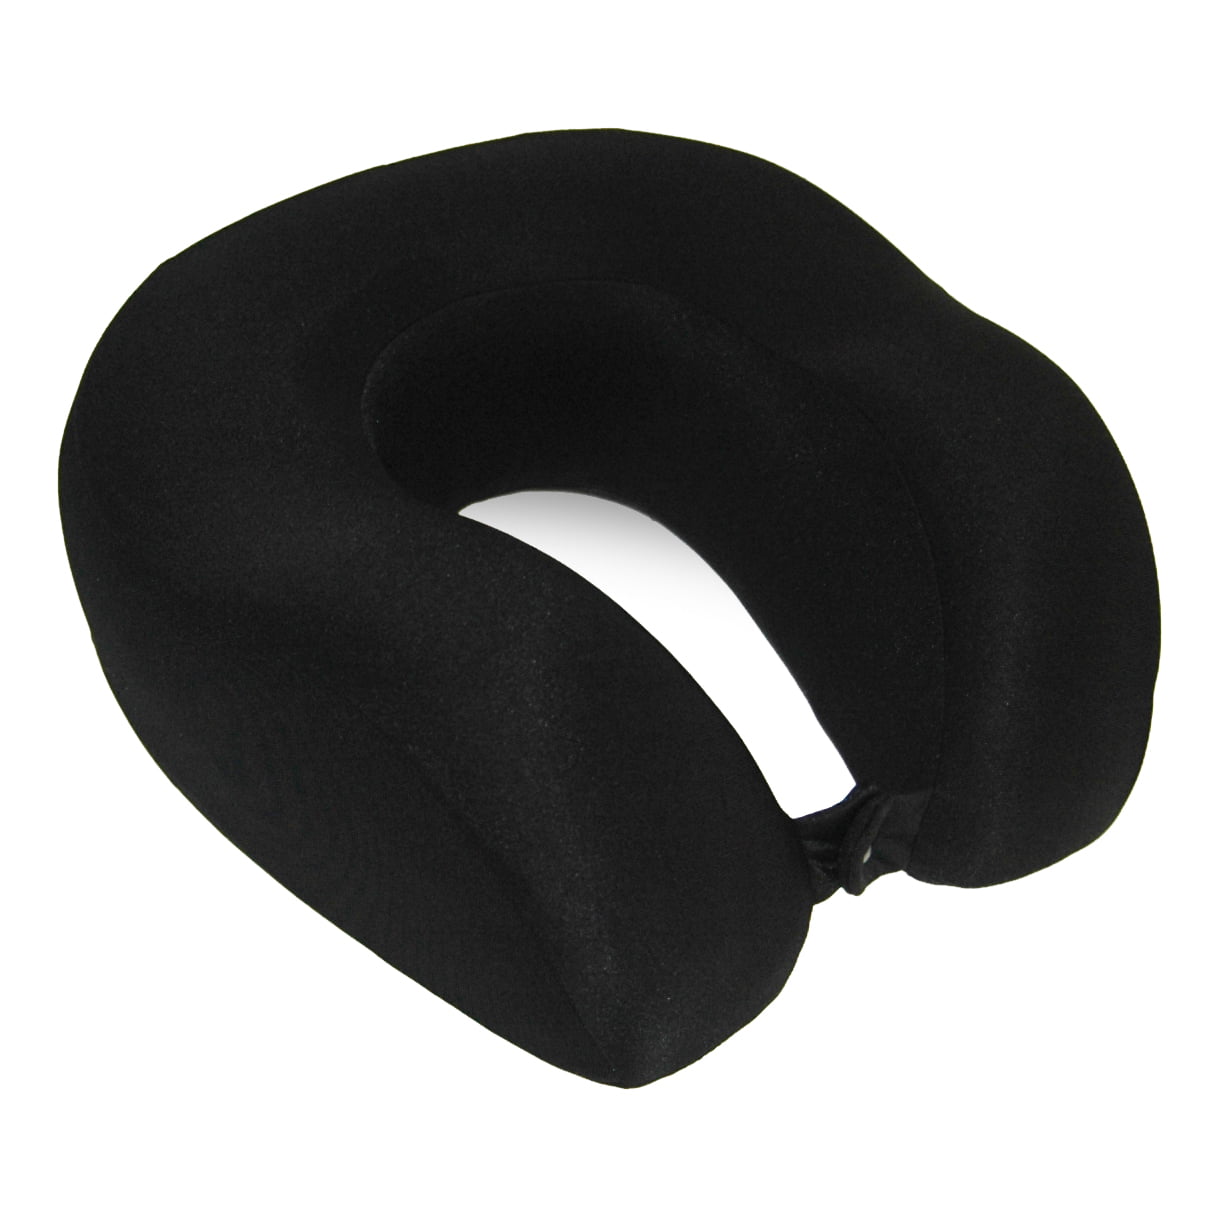 AT Cool Touch Memory Foam Travel Pillow - Black